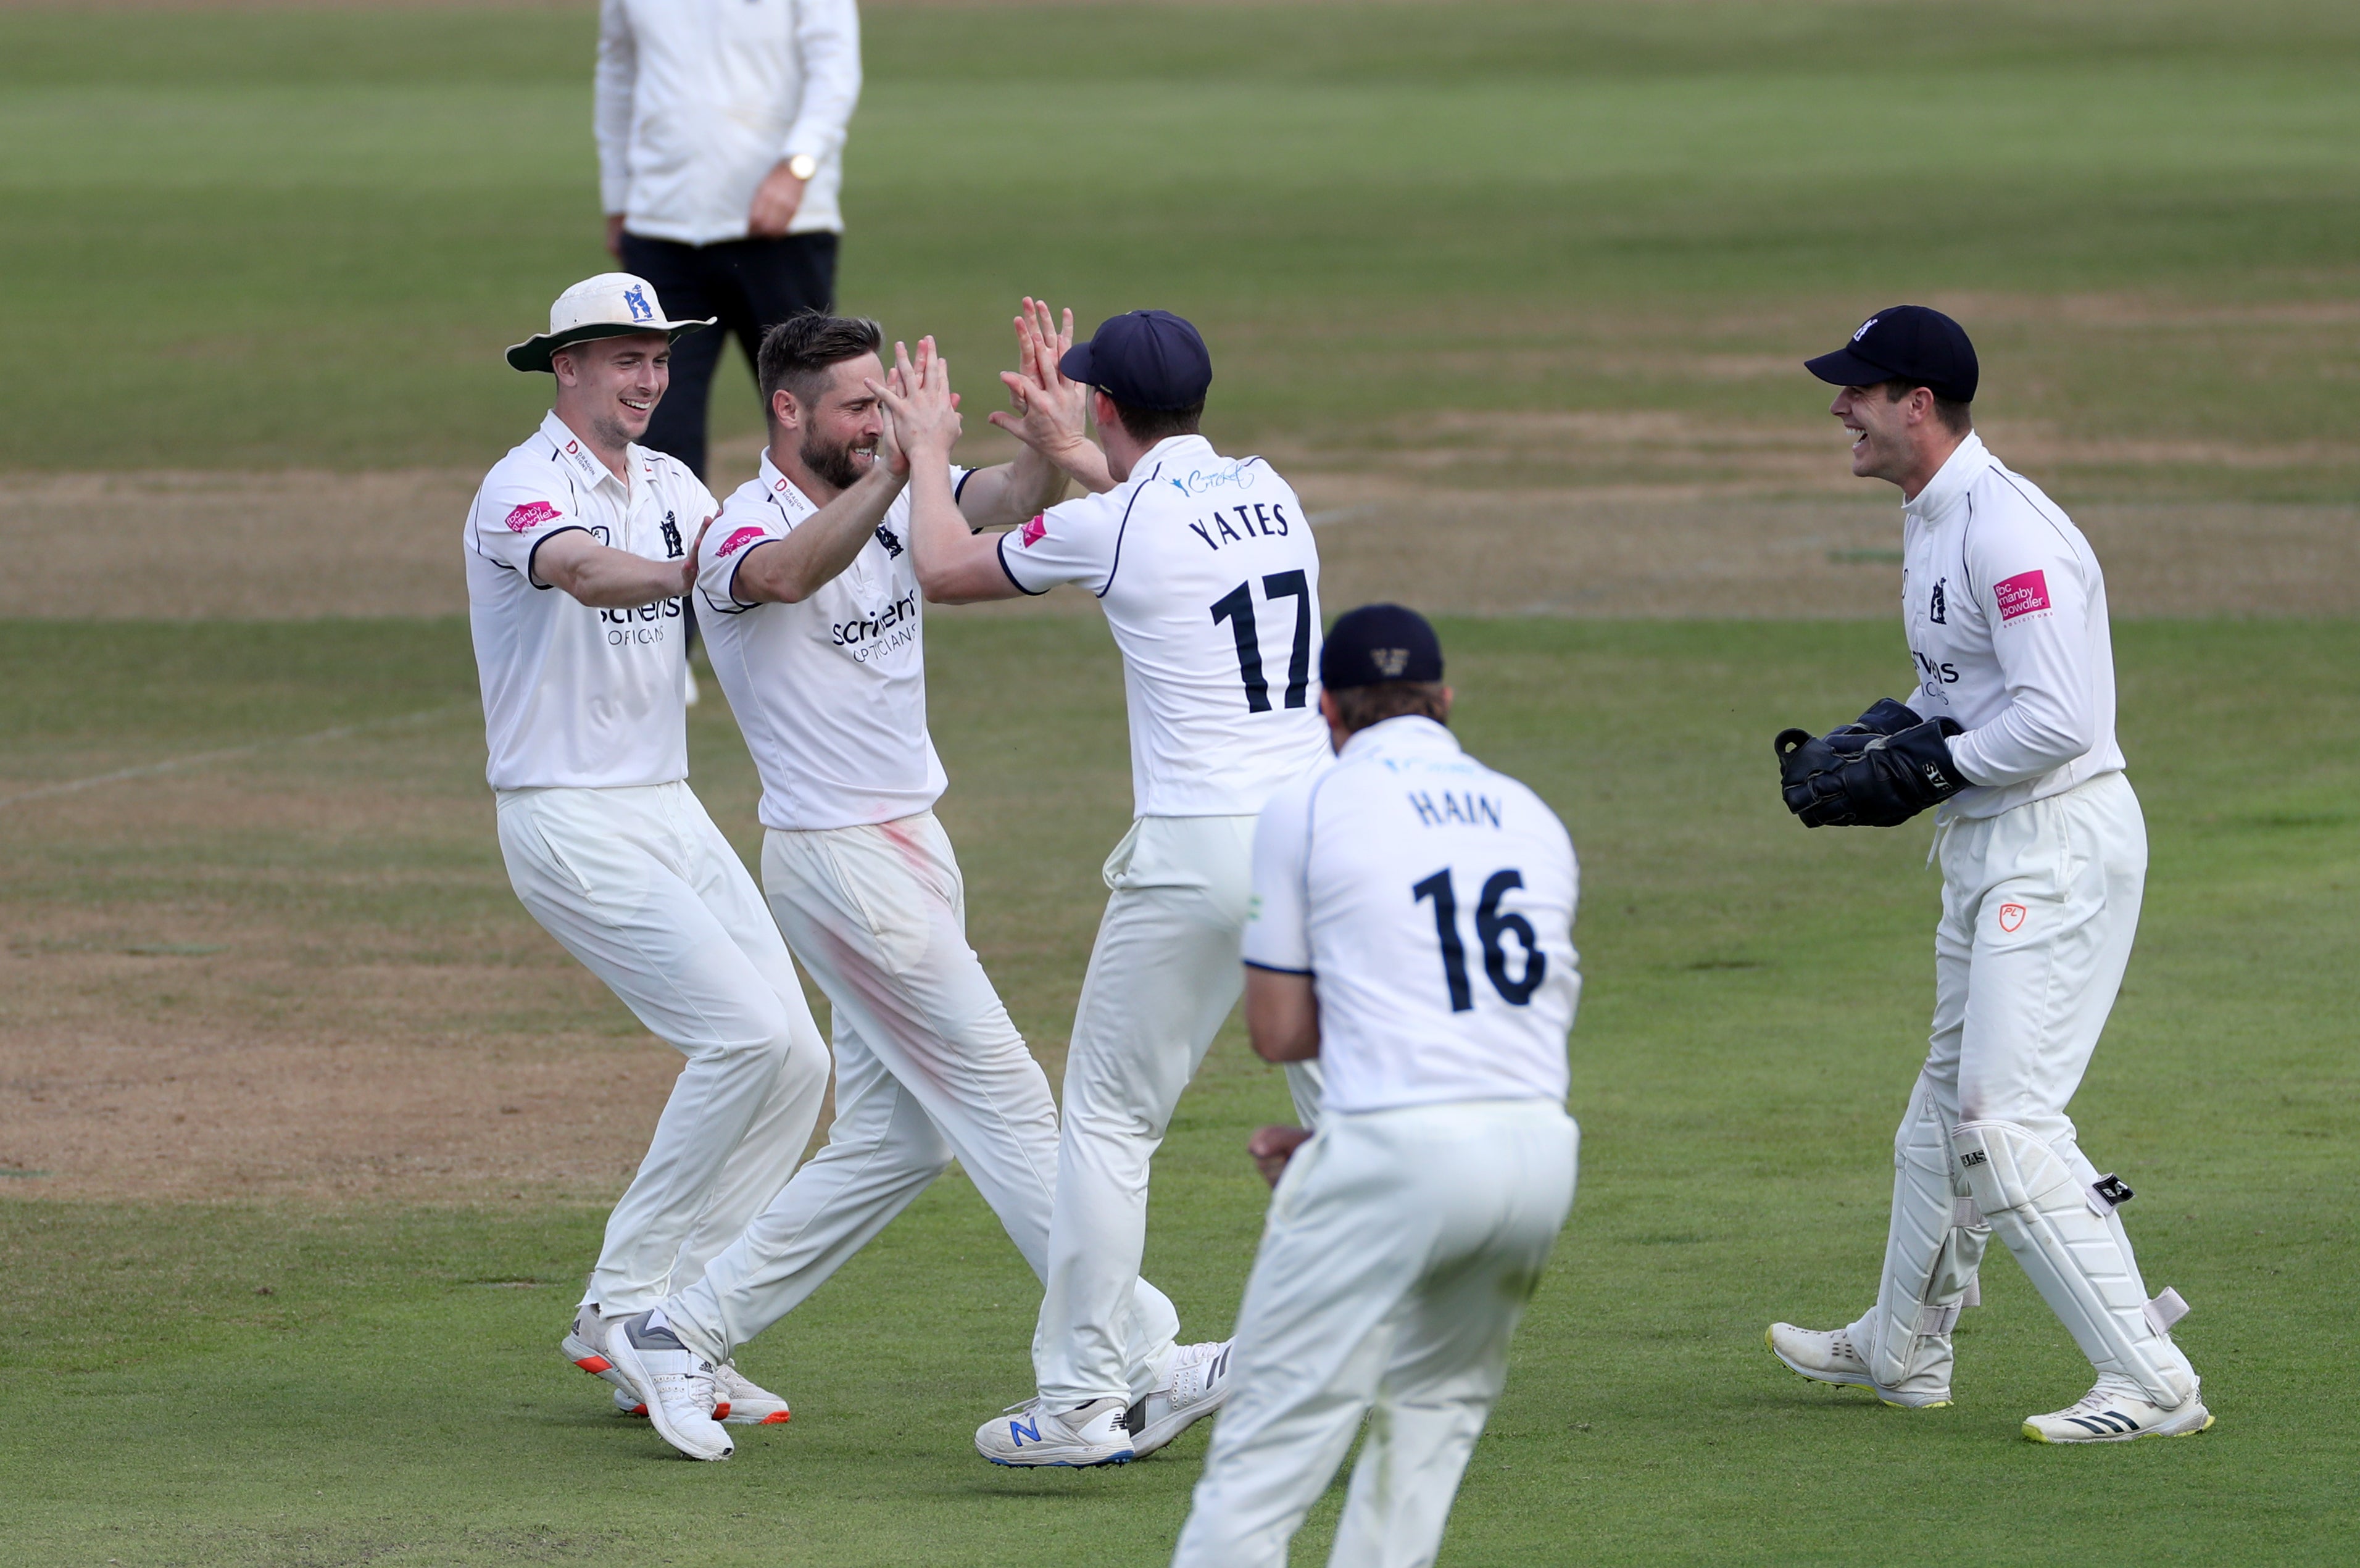 Chris Woakes is congratulated by team-mates for dismissing Warwickshire’s Jack Leach